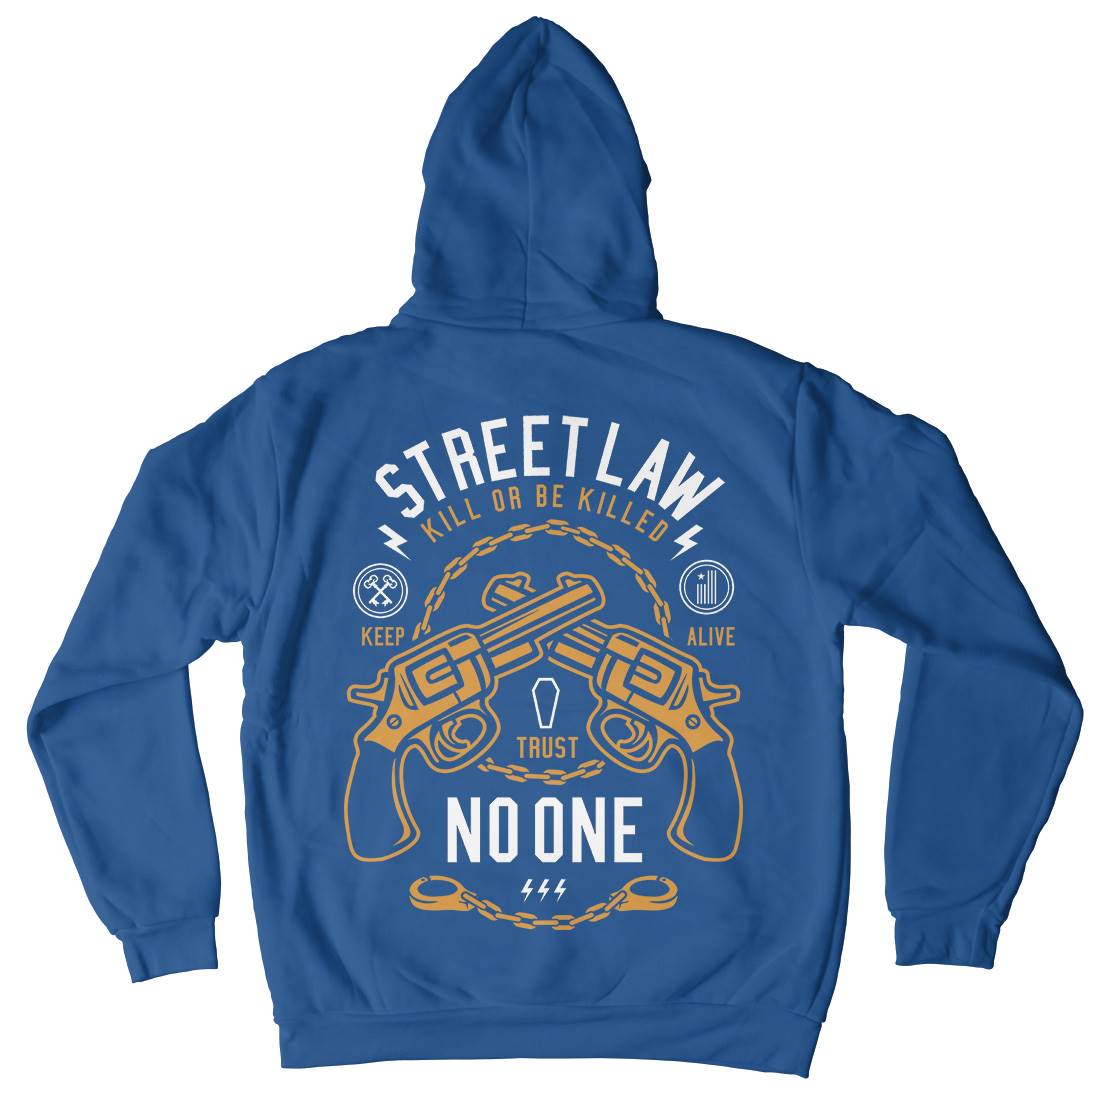 Street Law Kids Crew Neck Hoodie Quotes A286